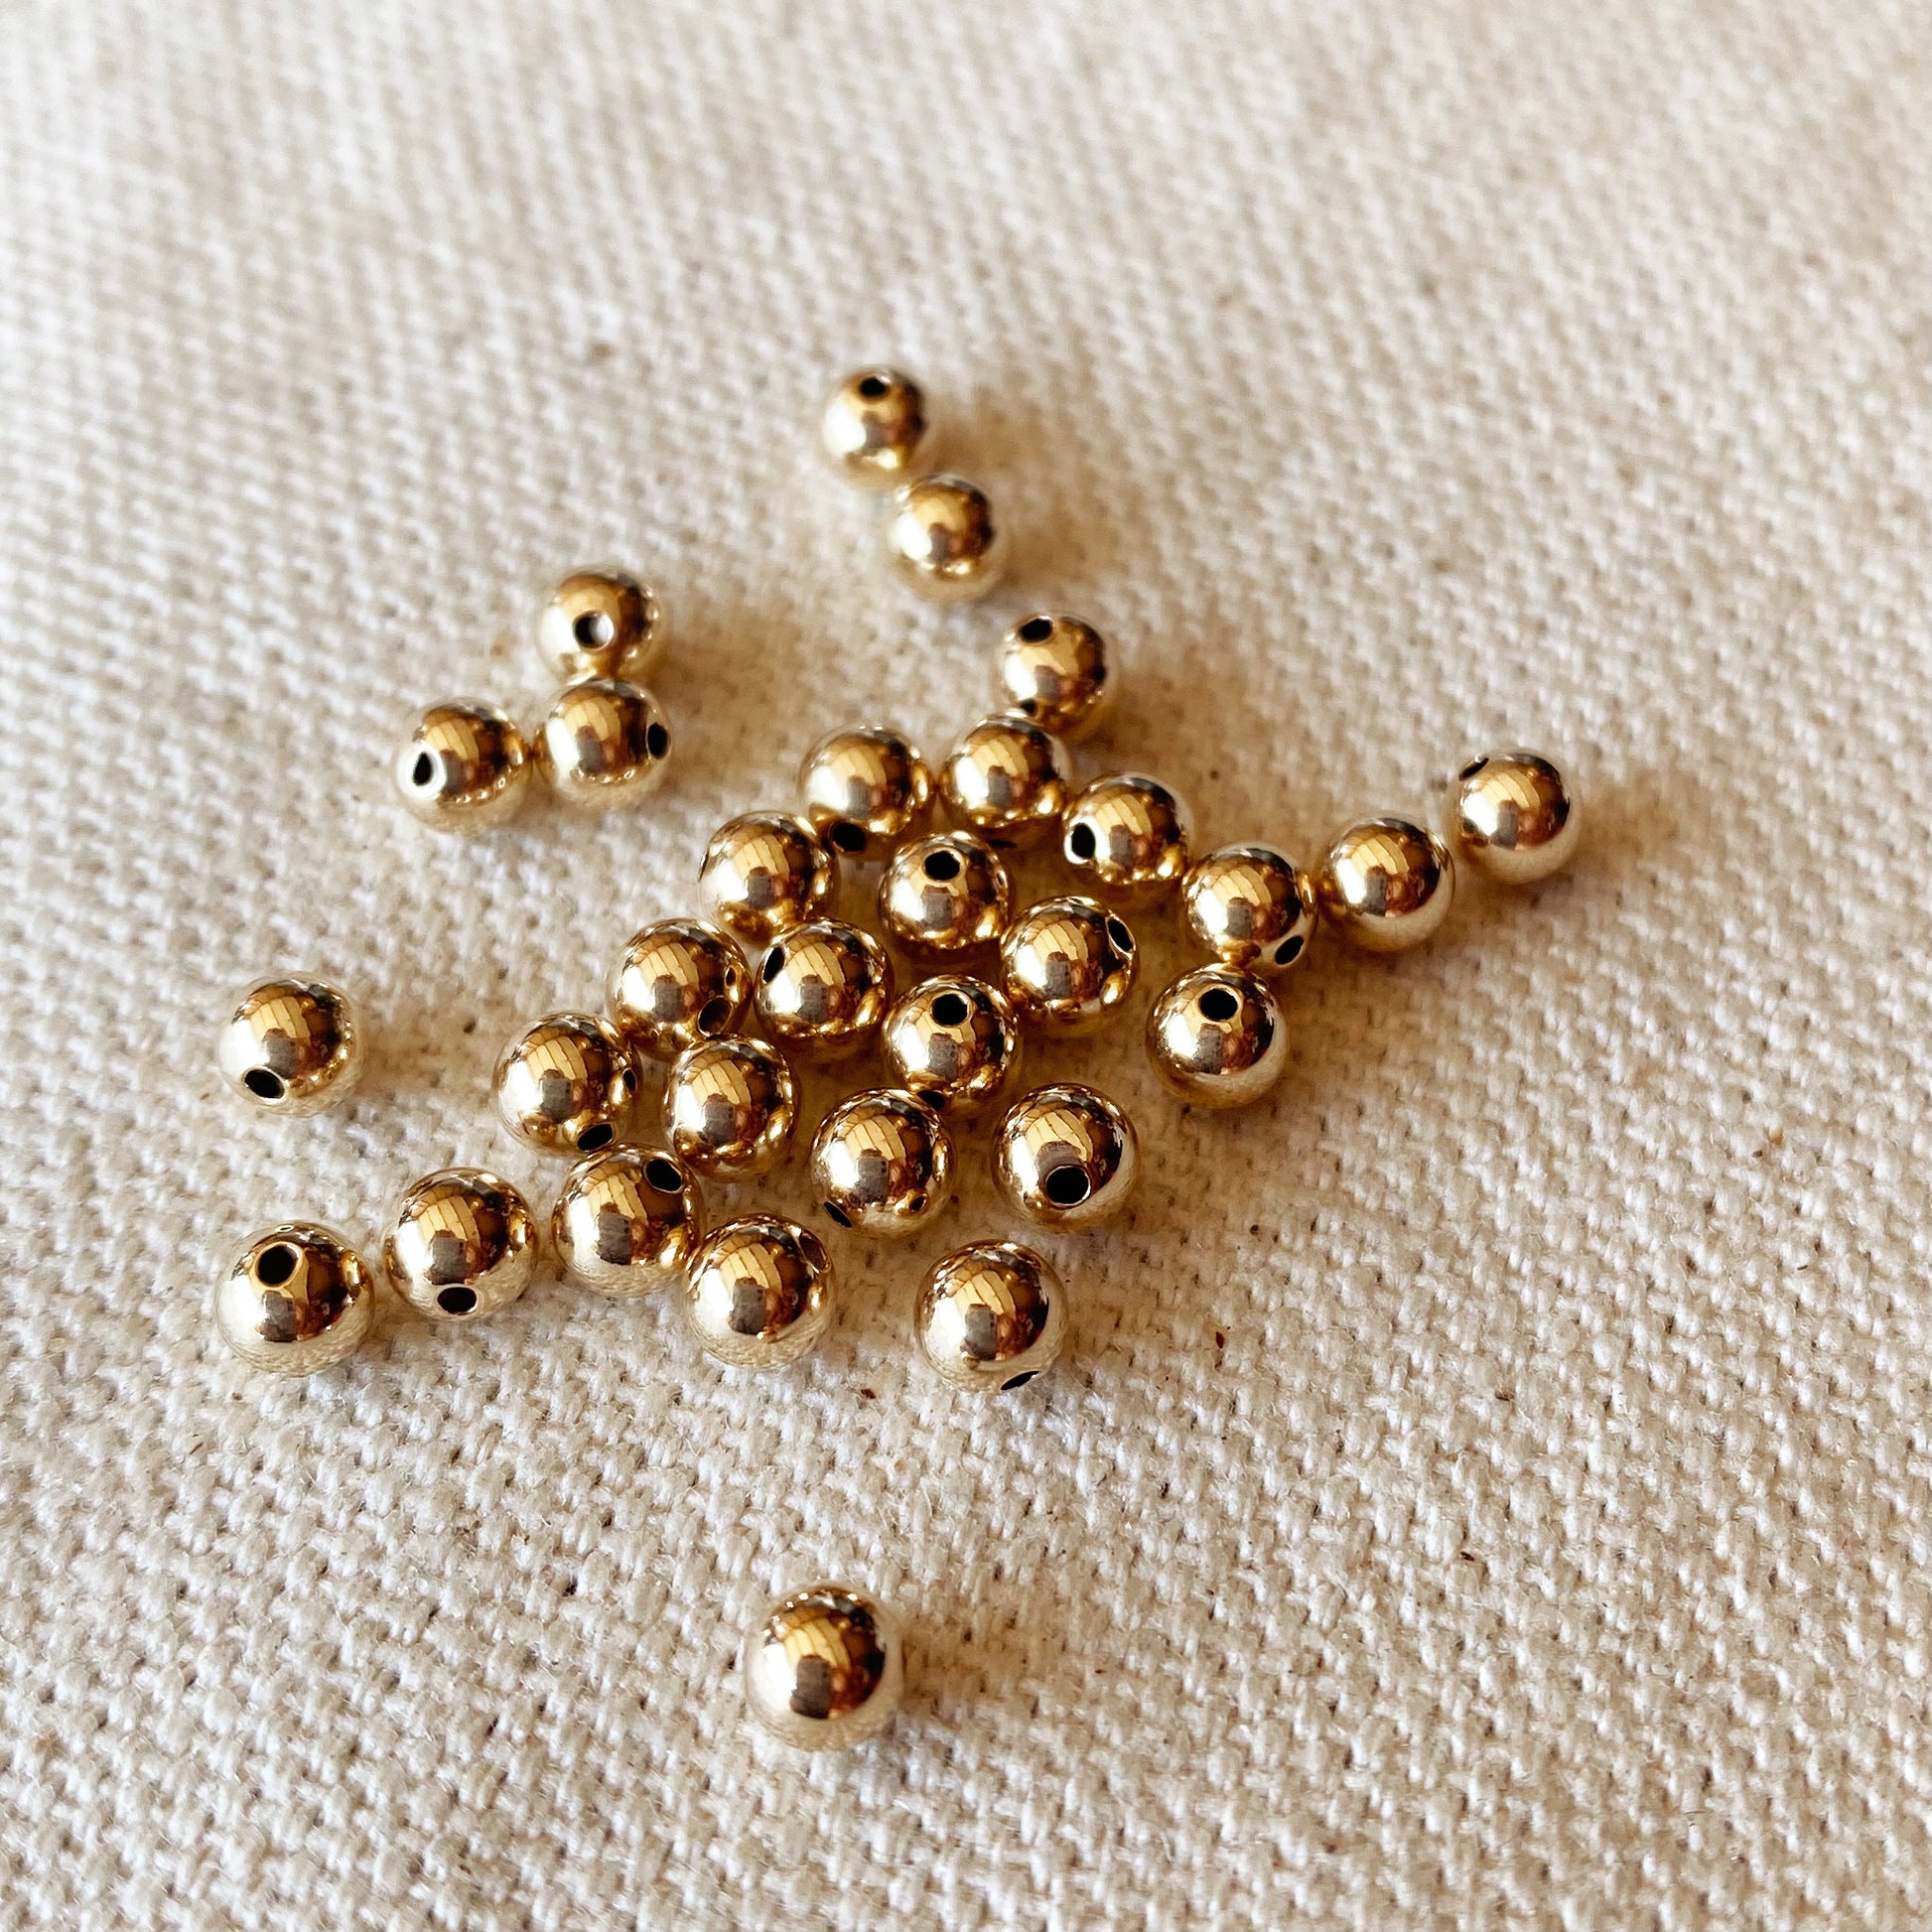 GoldFi 14k Gold Filled 4.0mm Bead For Jewelry Making.